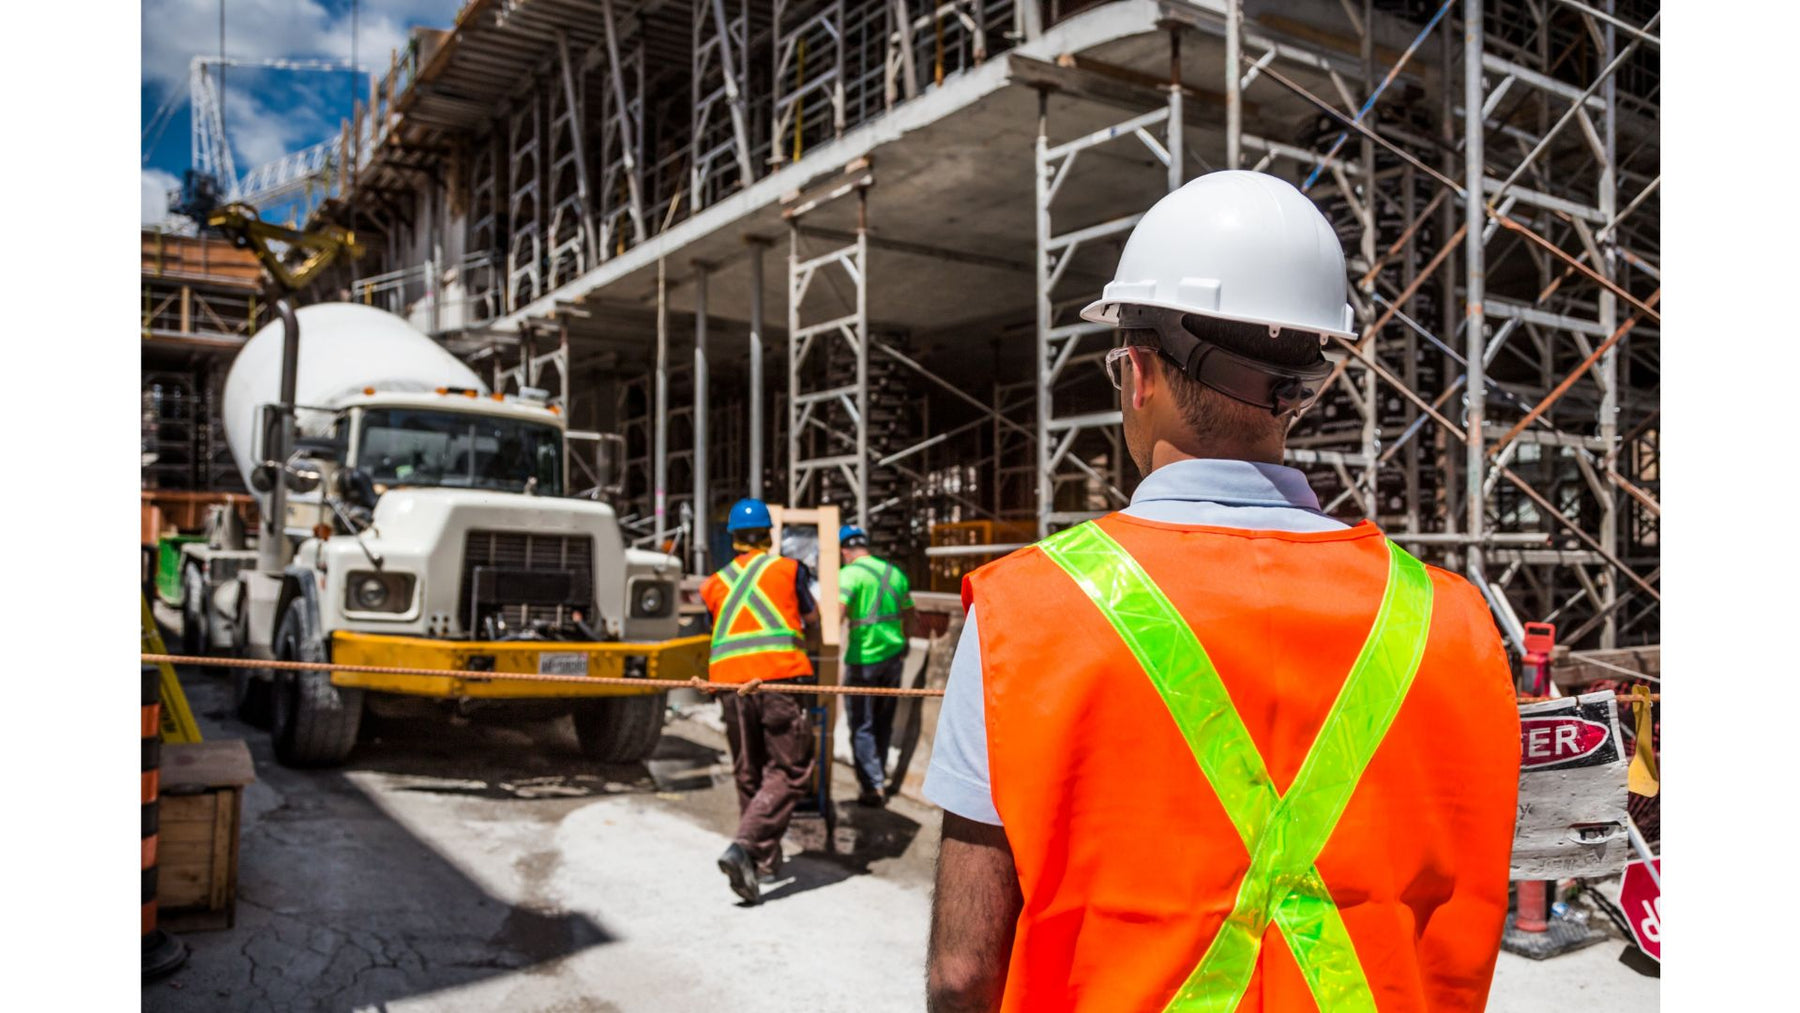 Construction site noise can be dangerous. How to protect yourself?